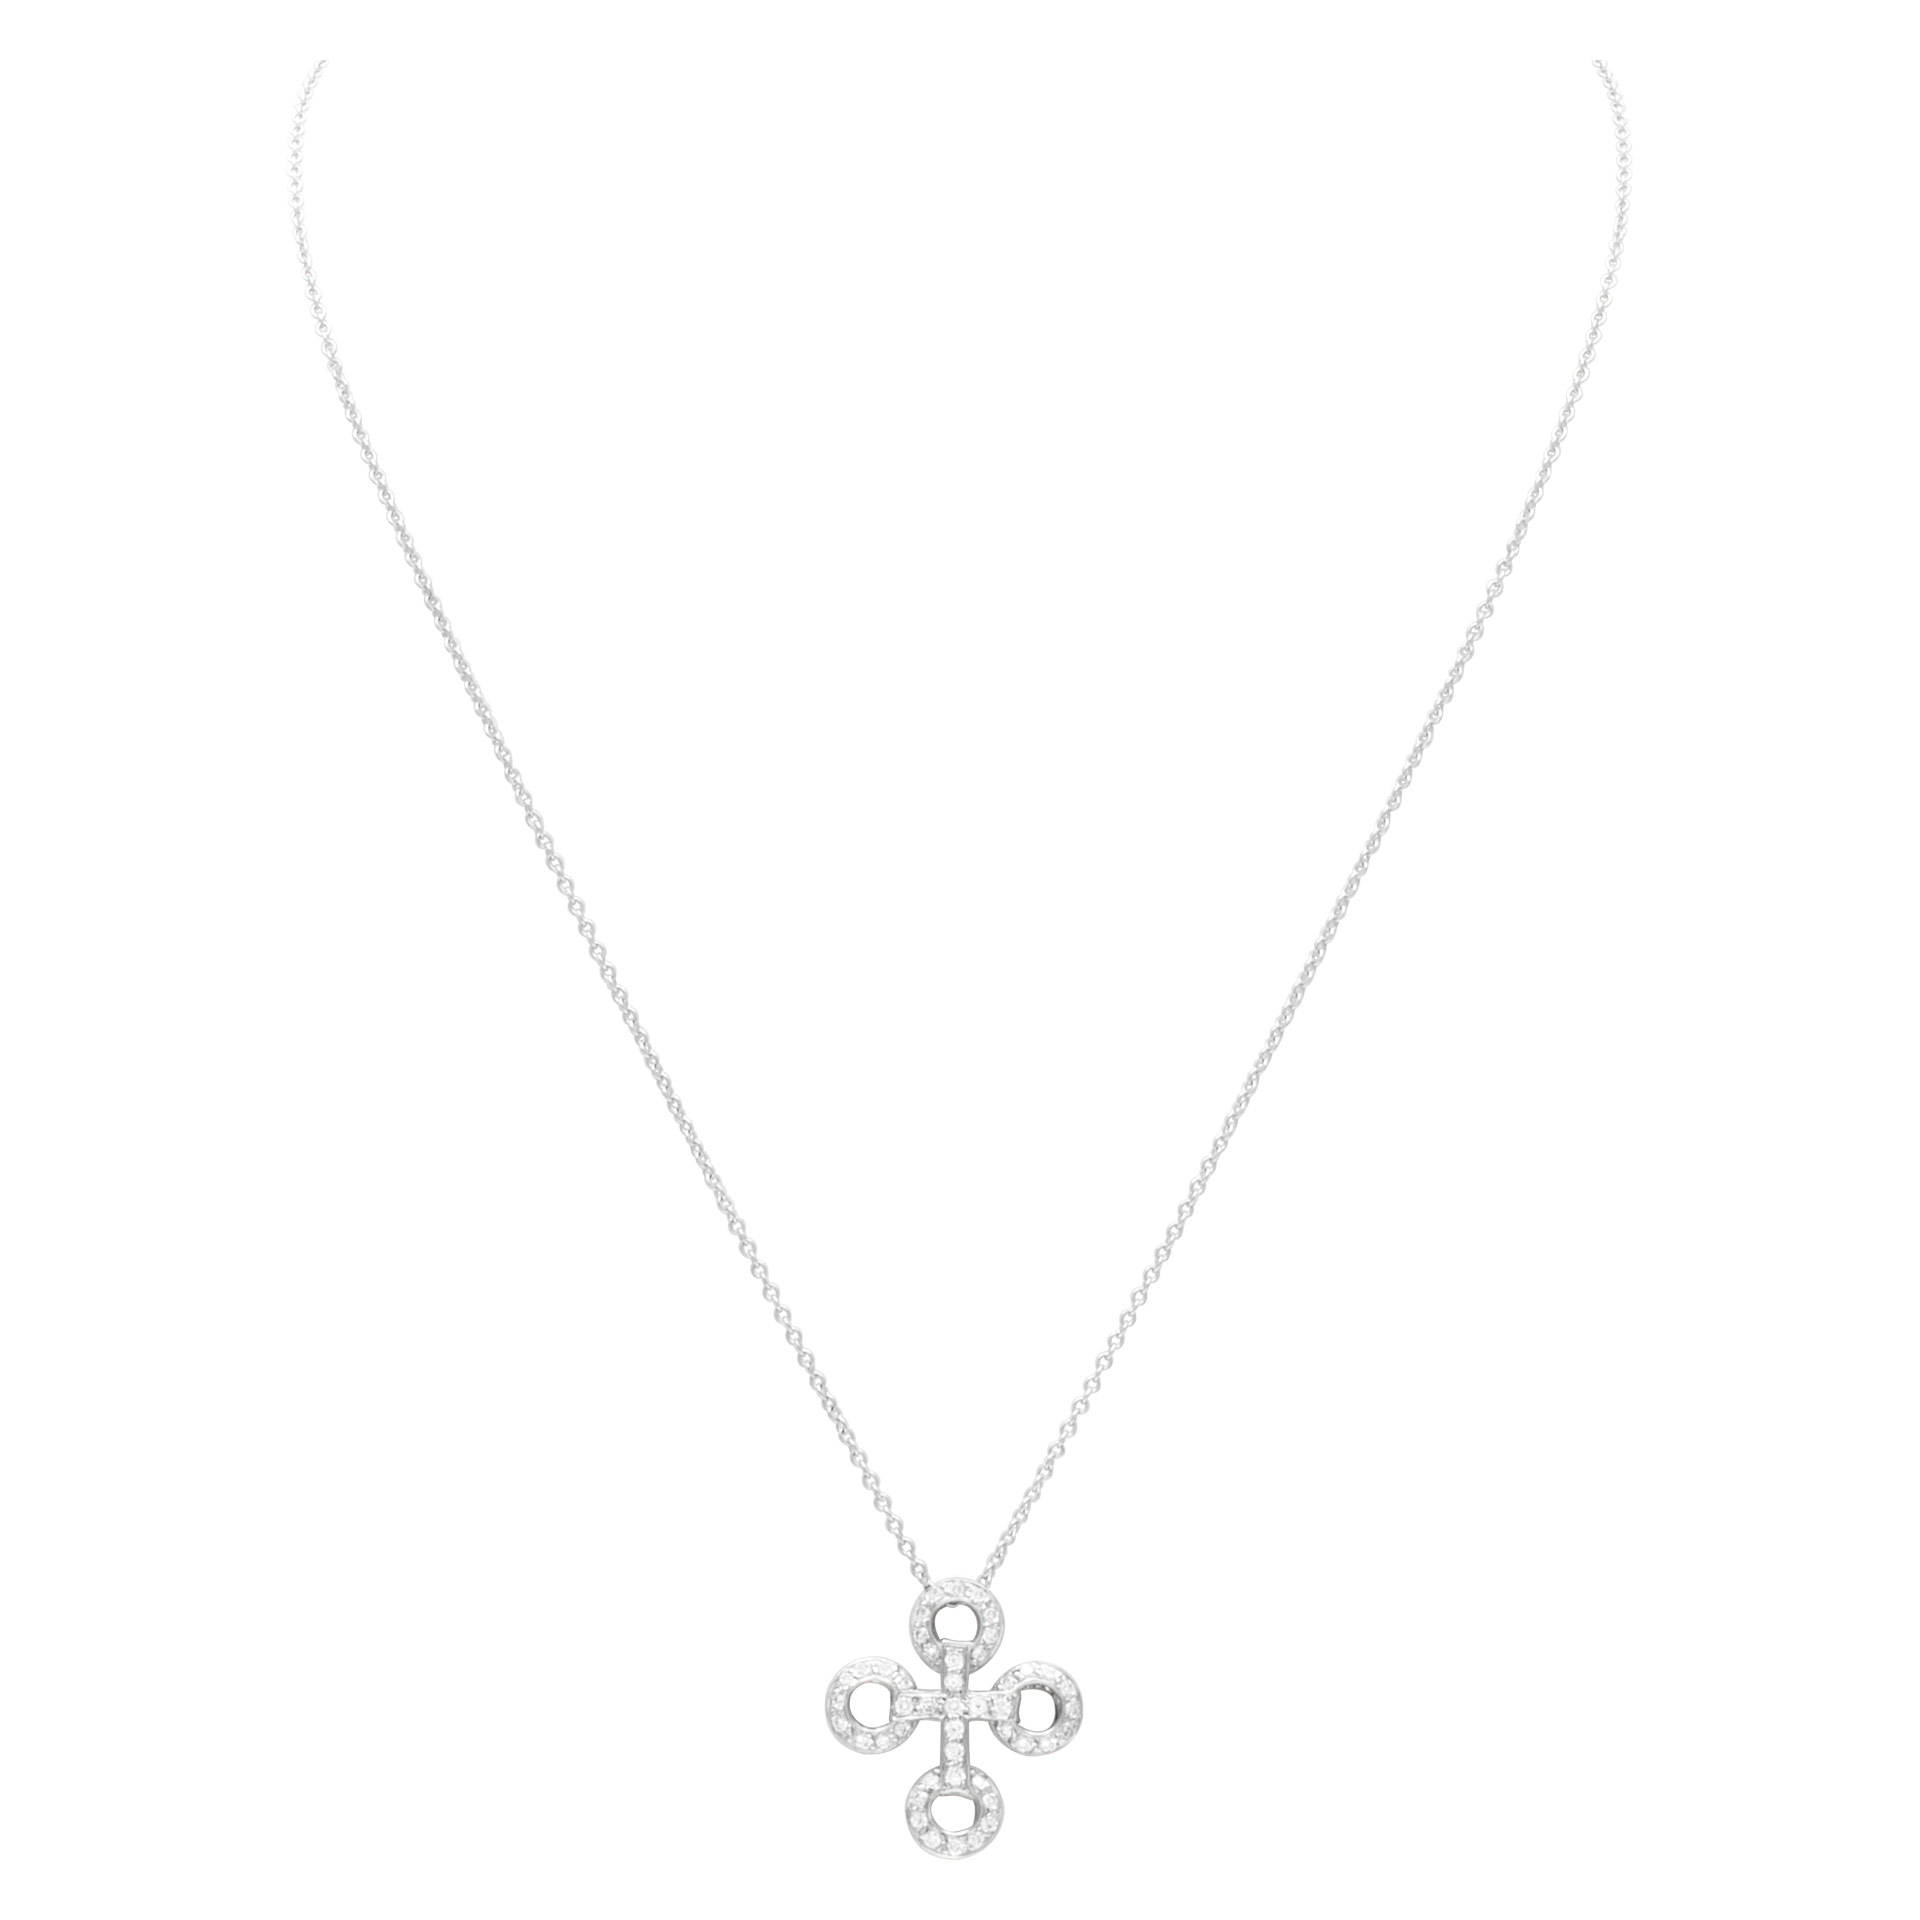 Pave Diamond cross necklace in 18k white gold. 0.50 carats in diamonds image 2